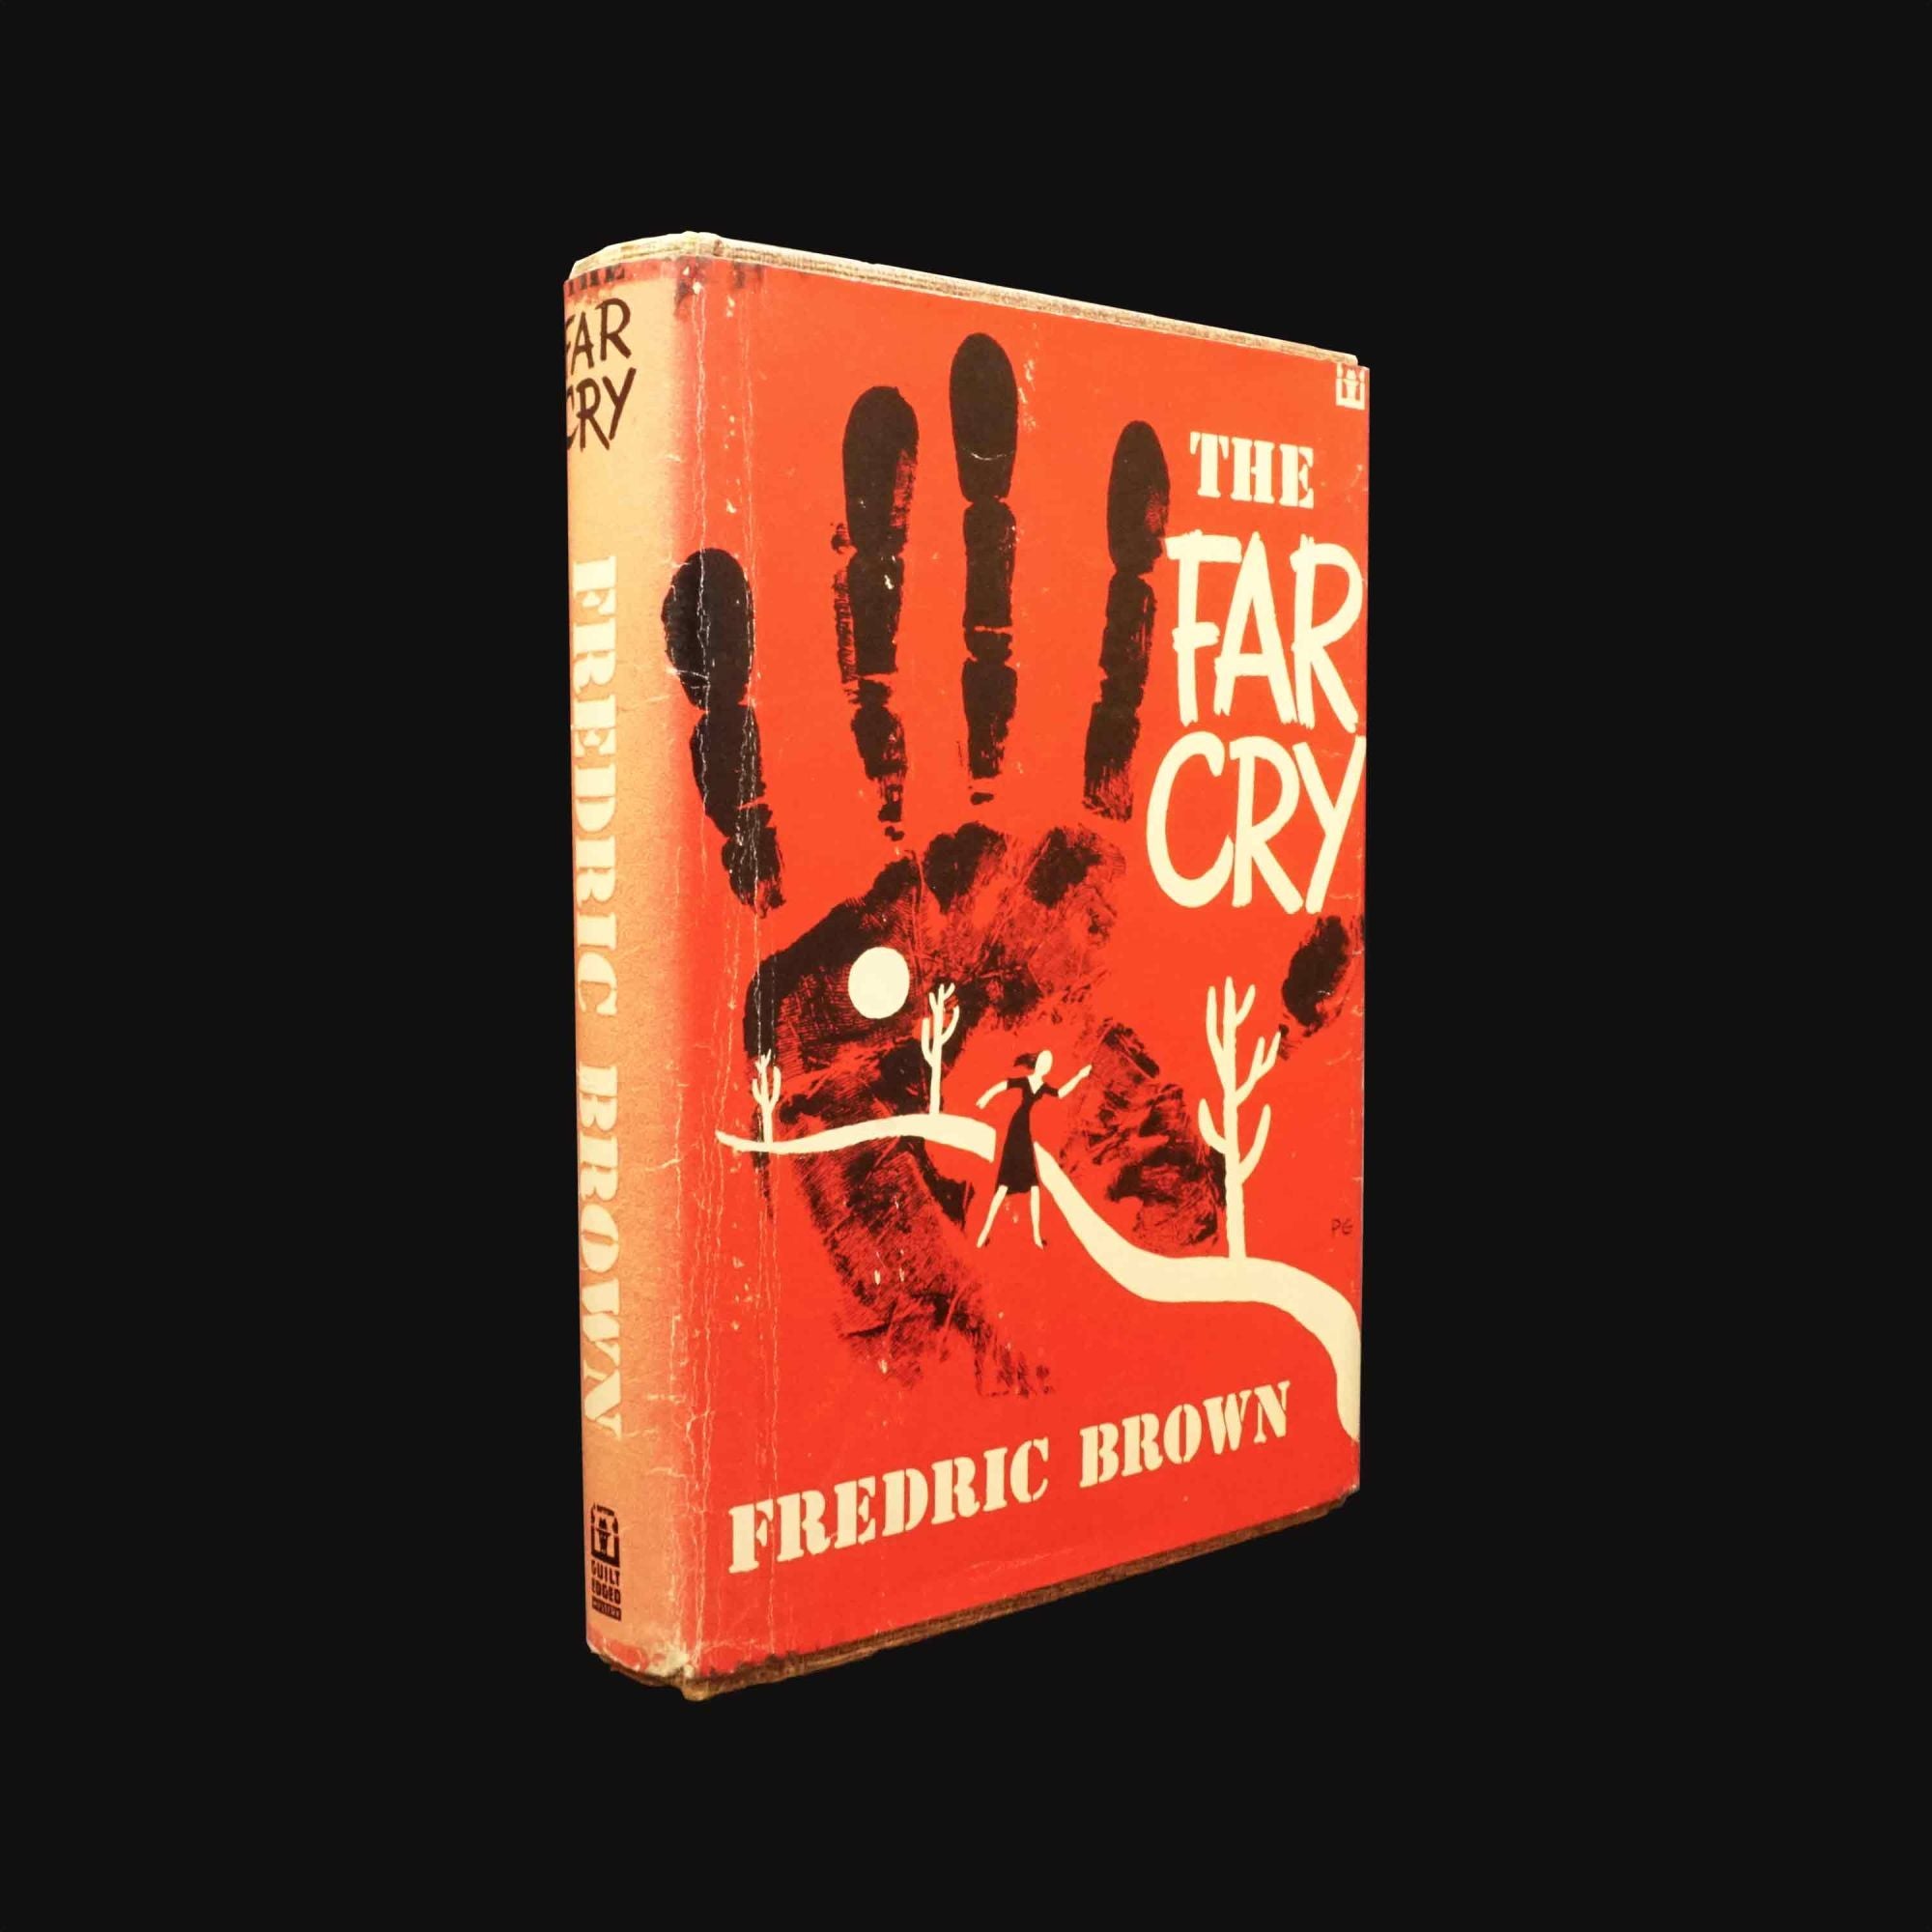 The Mind Thing by Fredric Brown